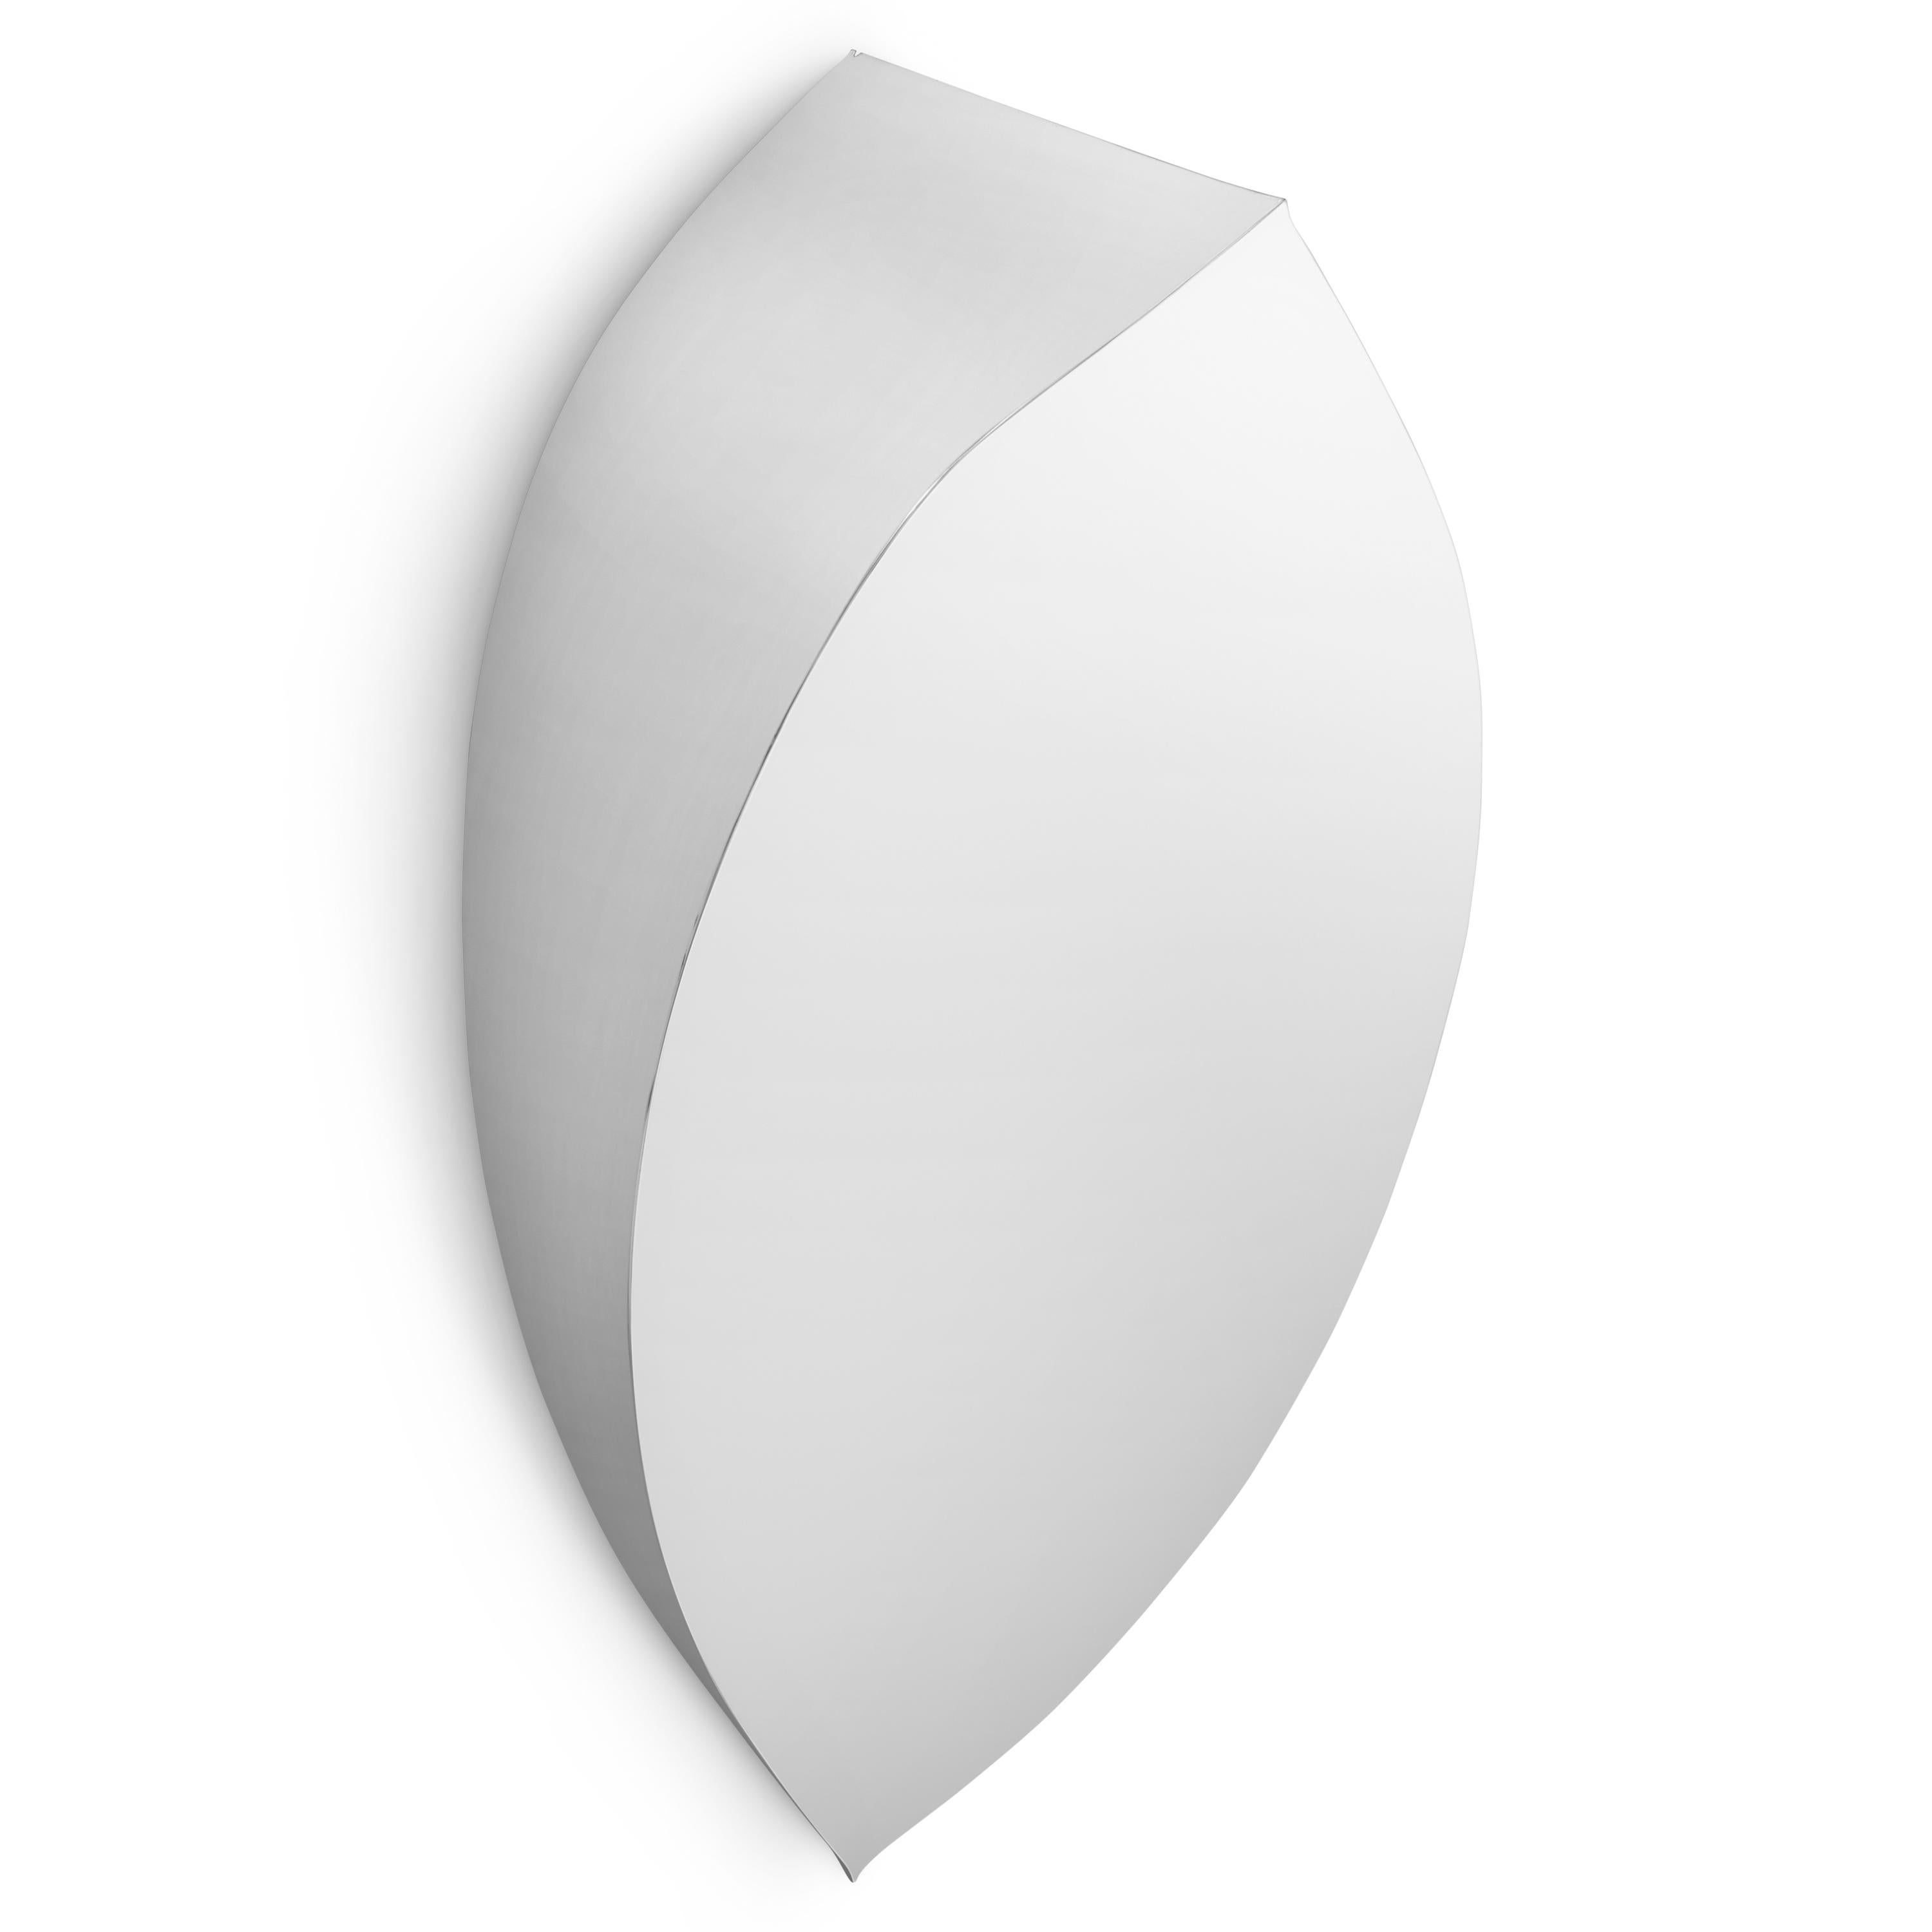 Mirror or Wall Mounted Object Lezka by Zieta

Material & finish: Polished Stainless steel

Dimensions
Height: 121.00 cm
Width: 58.00 cm
Depth: 61.00 cm

Experimental form
A minimalist and delicate object alluding to the shape known as